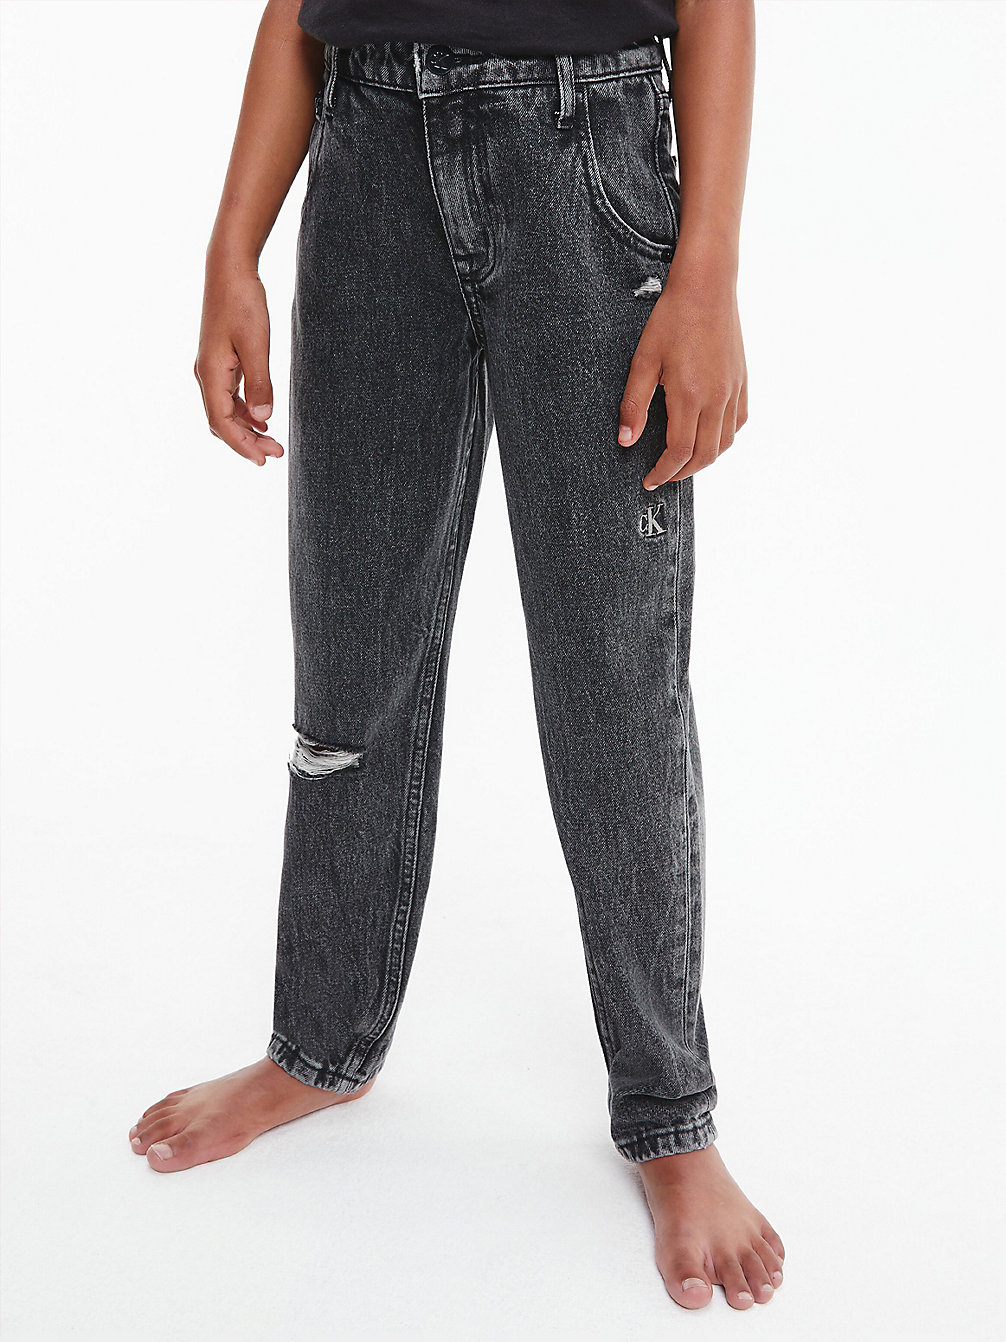 WASHED STONE GREY BLACK Relaxed Barrel Leg Jeans undefined girls Calvin Klein